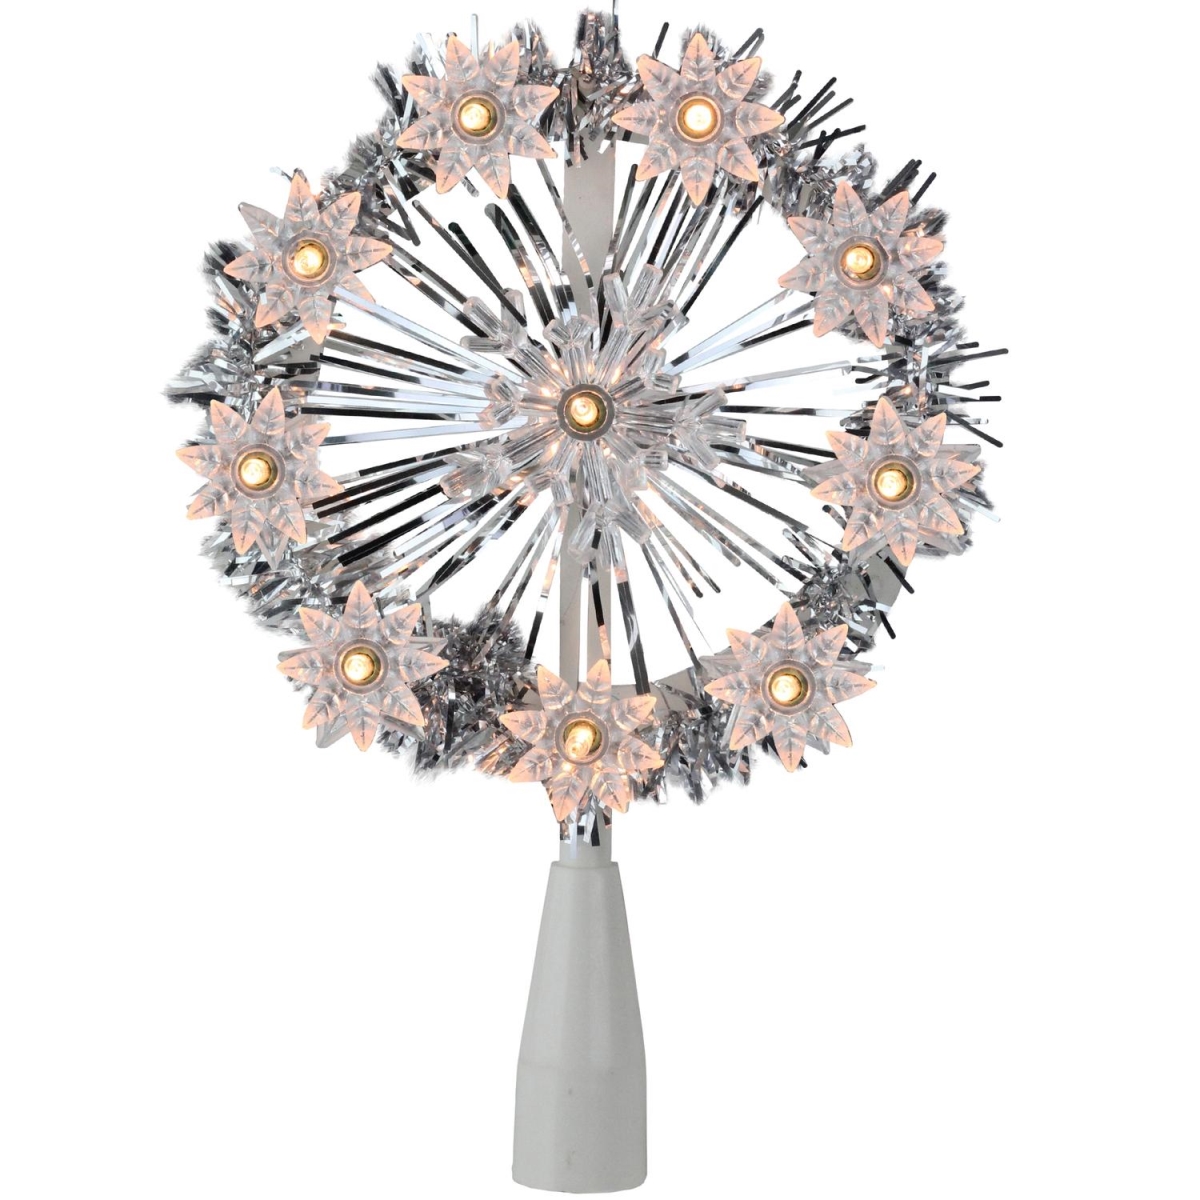 Picture of Northlight 32606340 7 in. Silver Tinsel Snowflake Starburst Christmas Tree Topper - Clear Lights